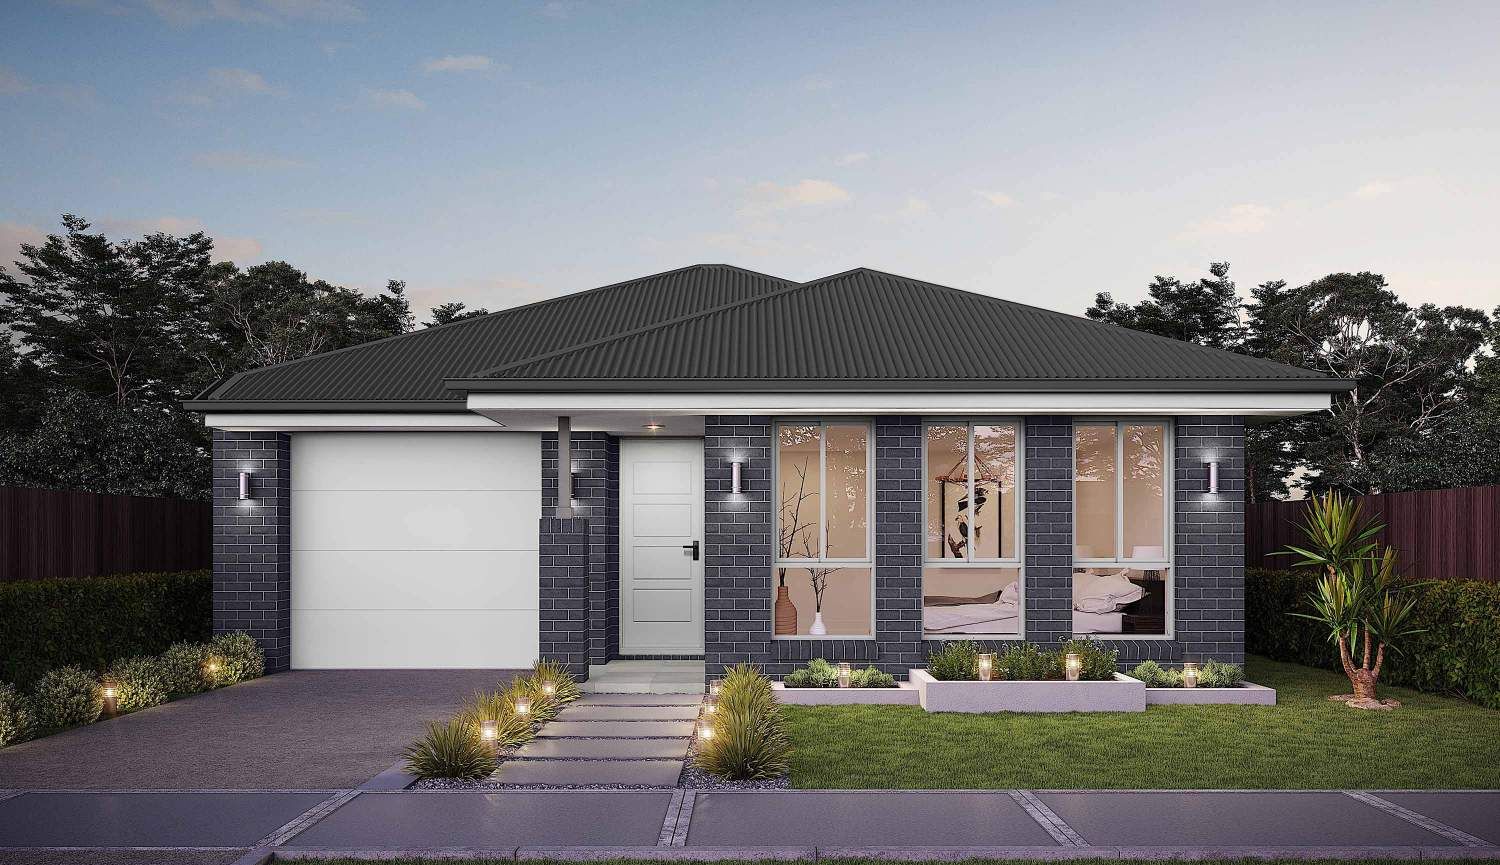 3 bedrooms New House & Land in CALL BHARGAV TO BOOK SITE VISIT BOX HILL NSW, 2765